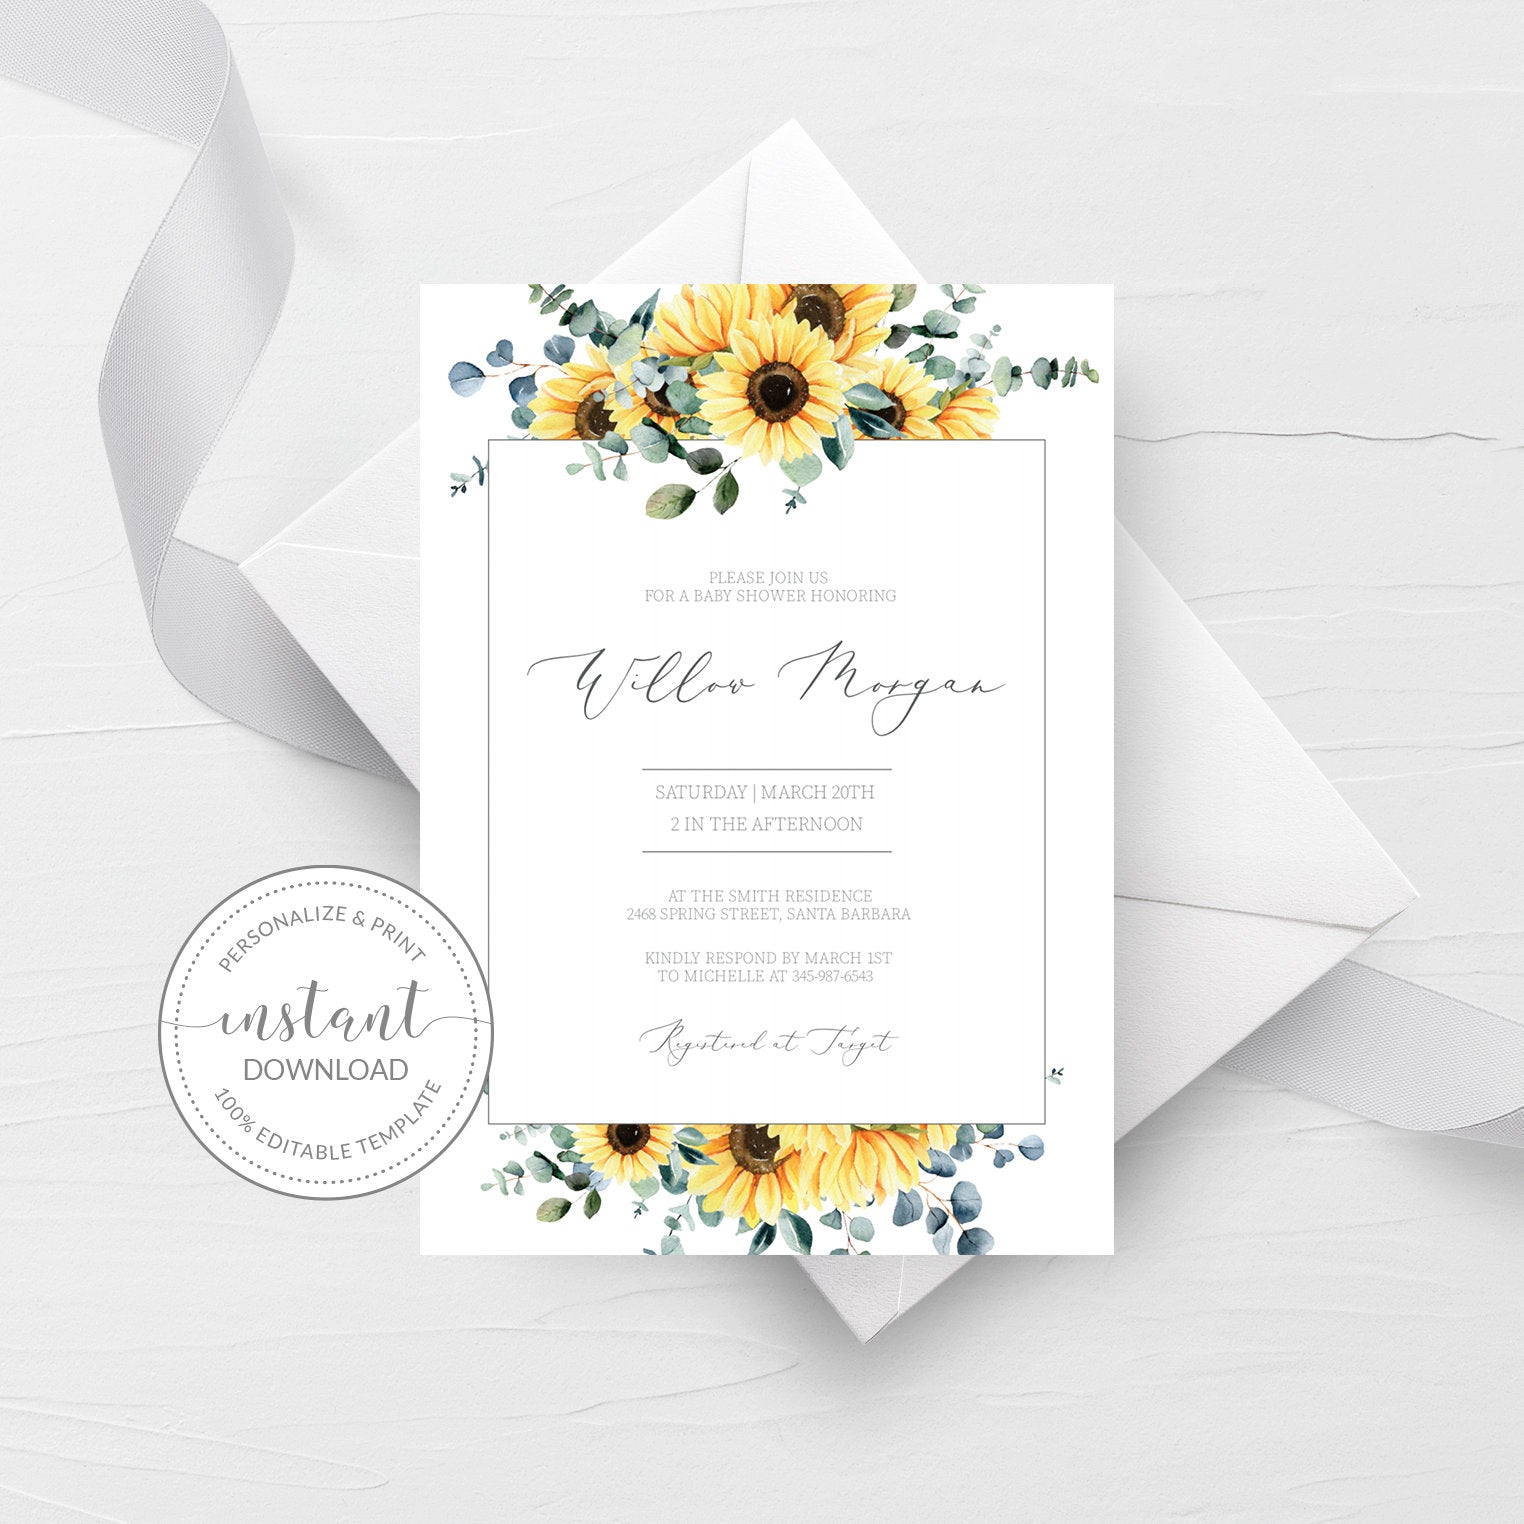 Sunflower Baby Shower Invitation Template, Printable, Editable INSTANT DOWNLOAD - S100